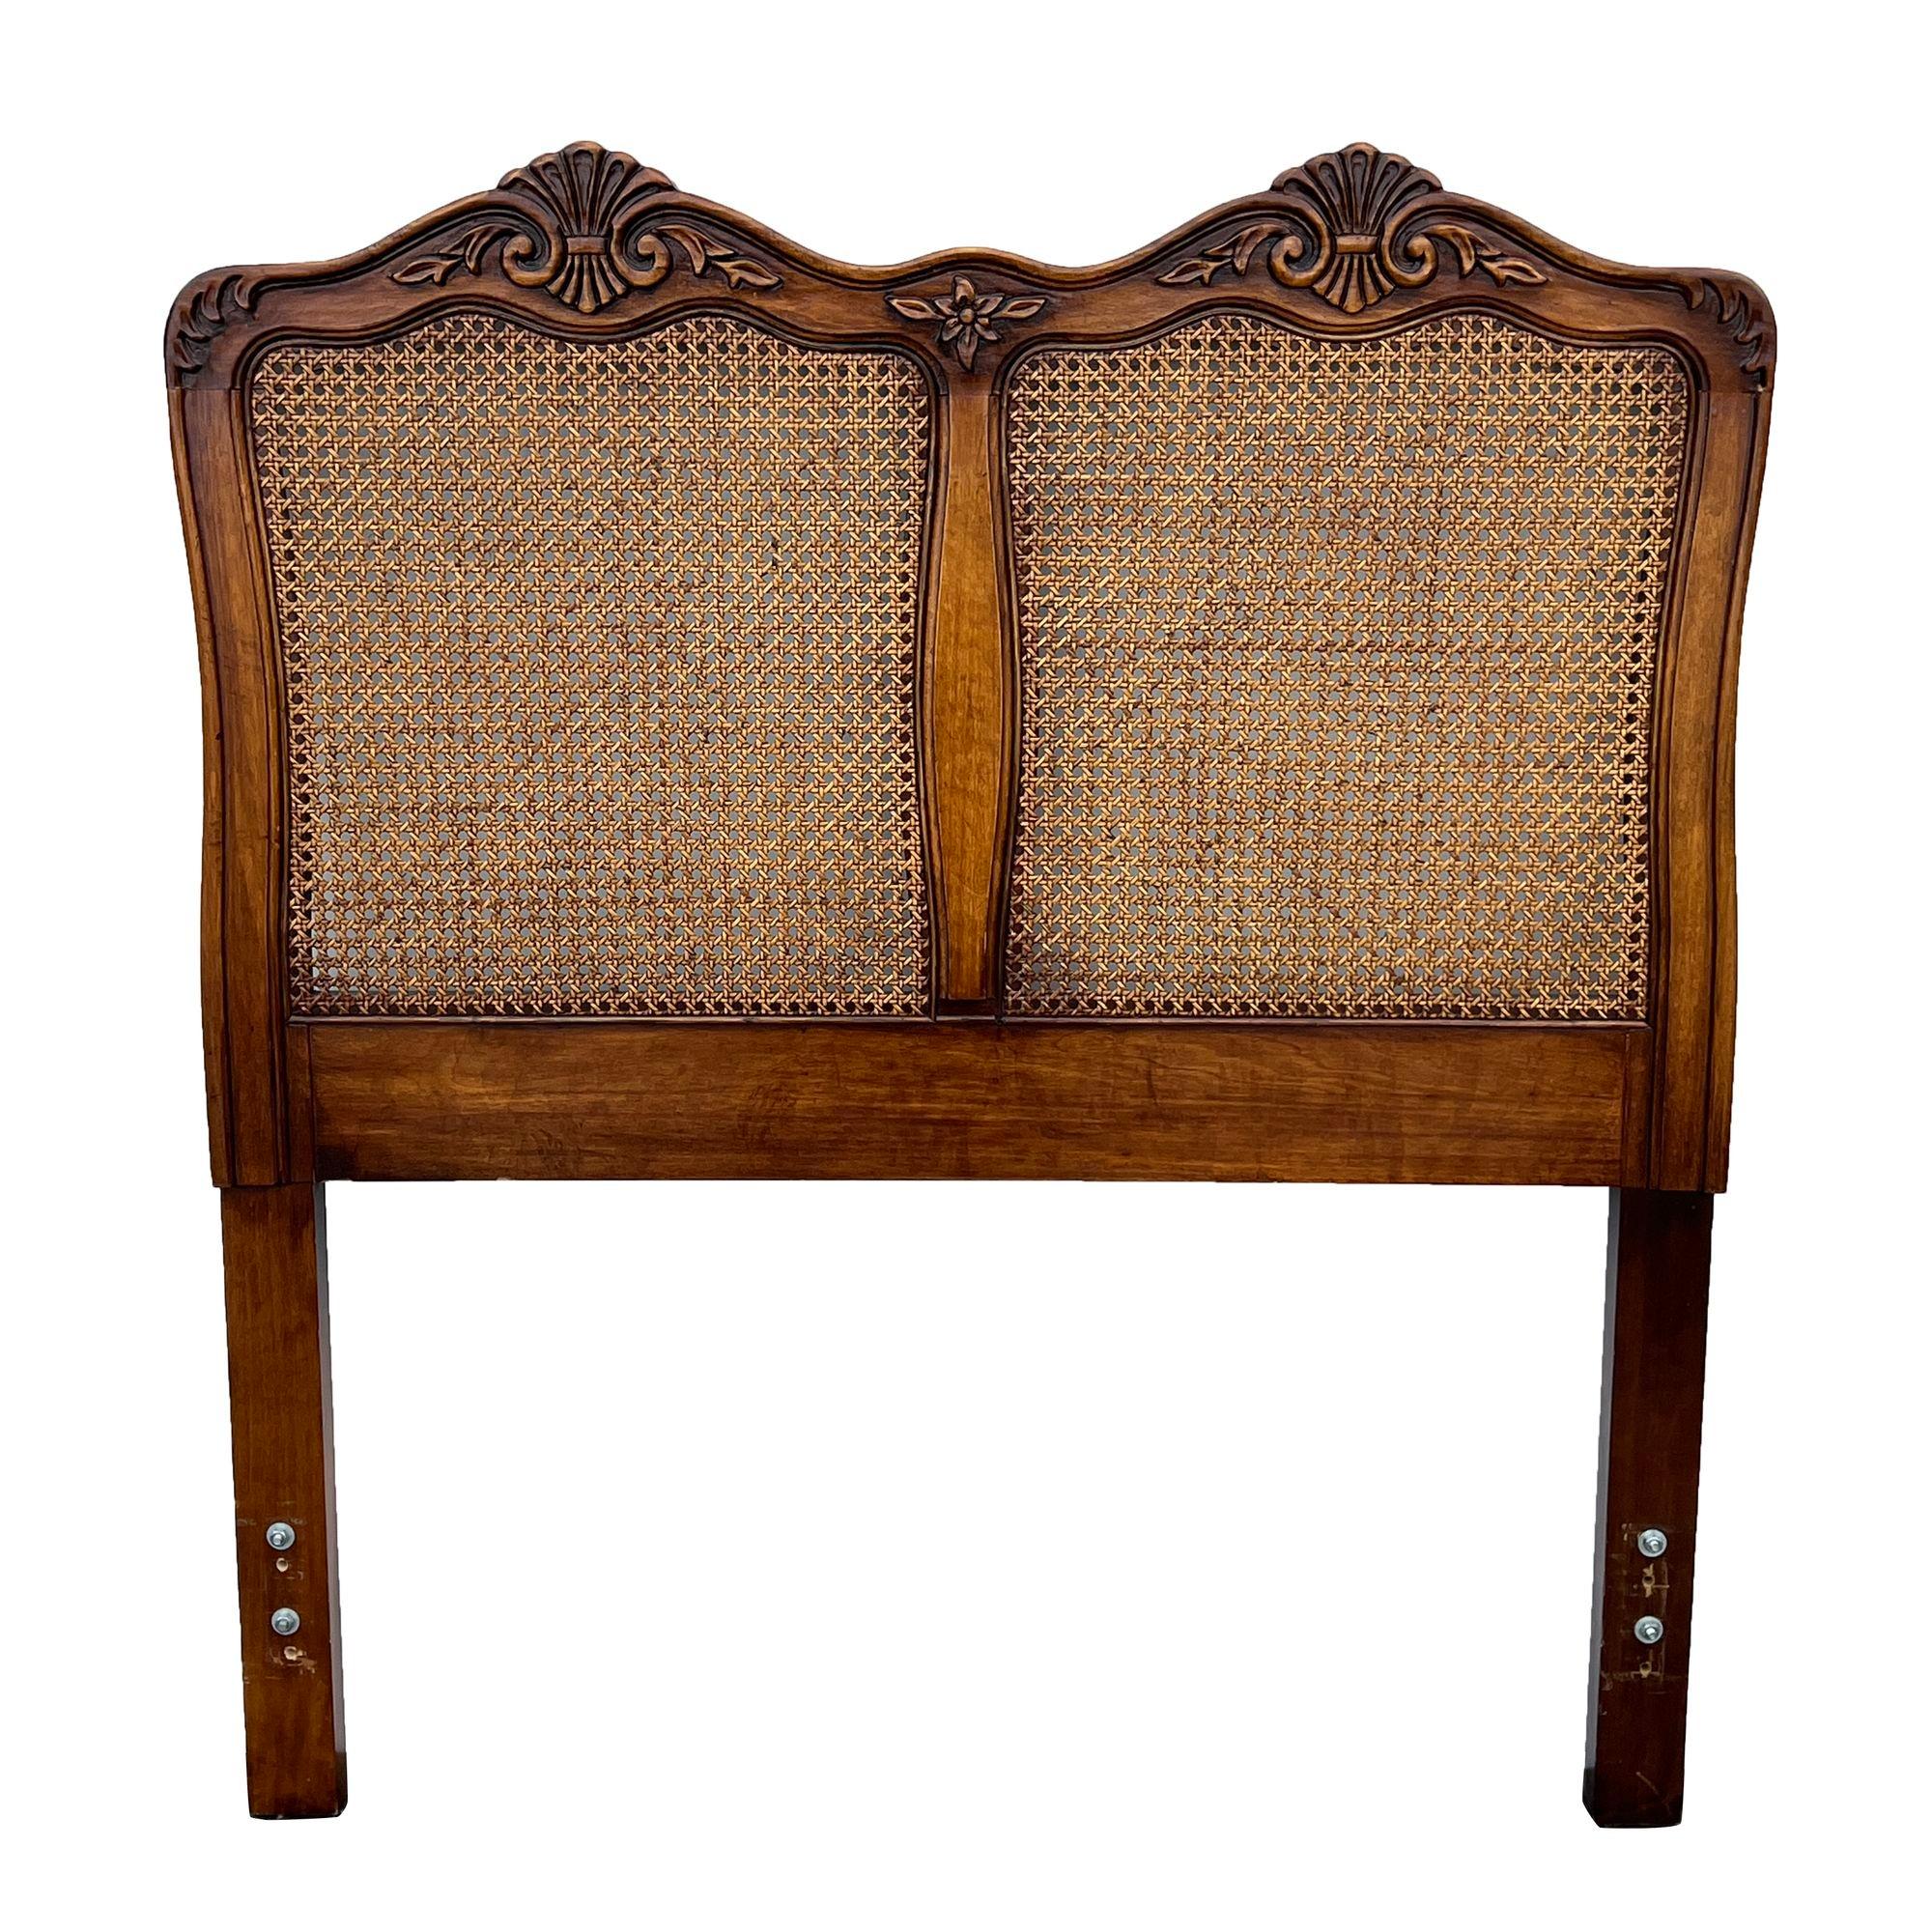 USA, 1987
Pair of Twin Headboards in walnut with caned backs, attributed to Henredon- from an estate with other signed Henredon pieces. In very good vintage condition. Classic decorator style.
CONDITION NOTES: In very good original condition, only